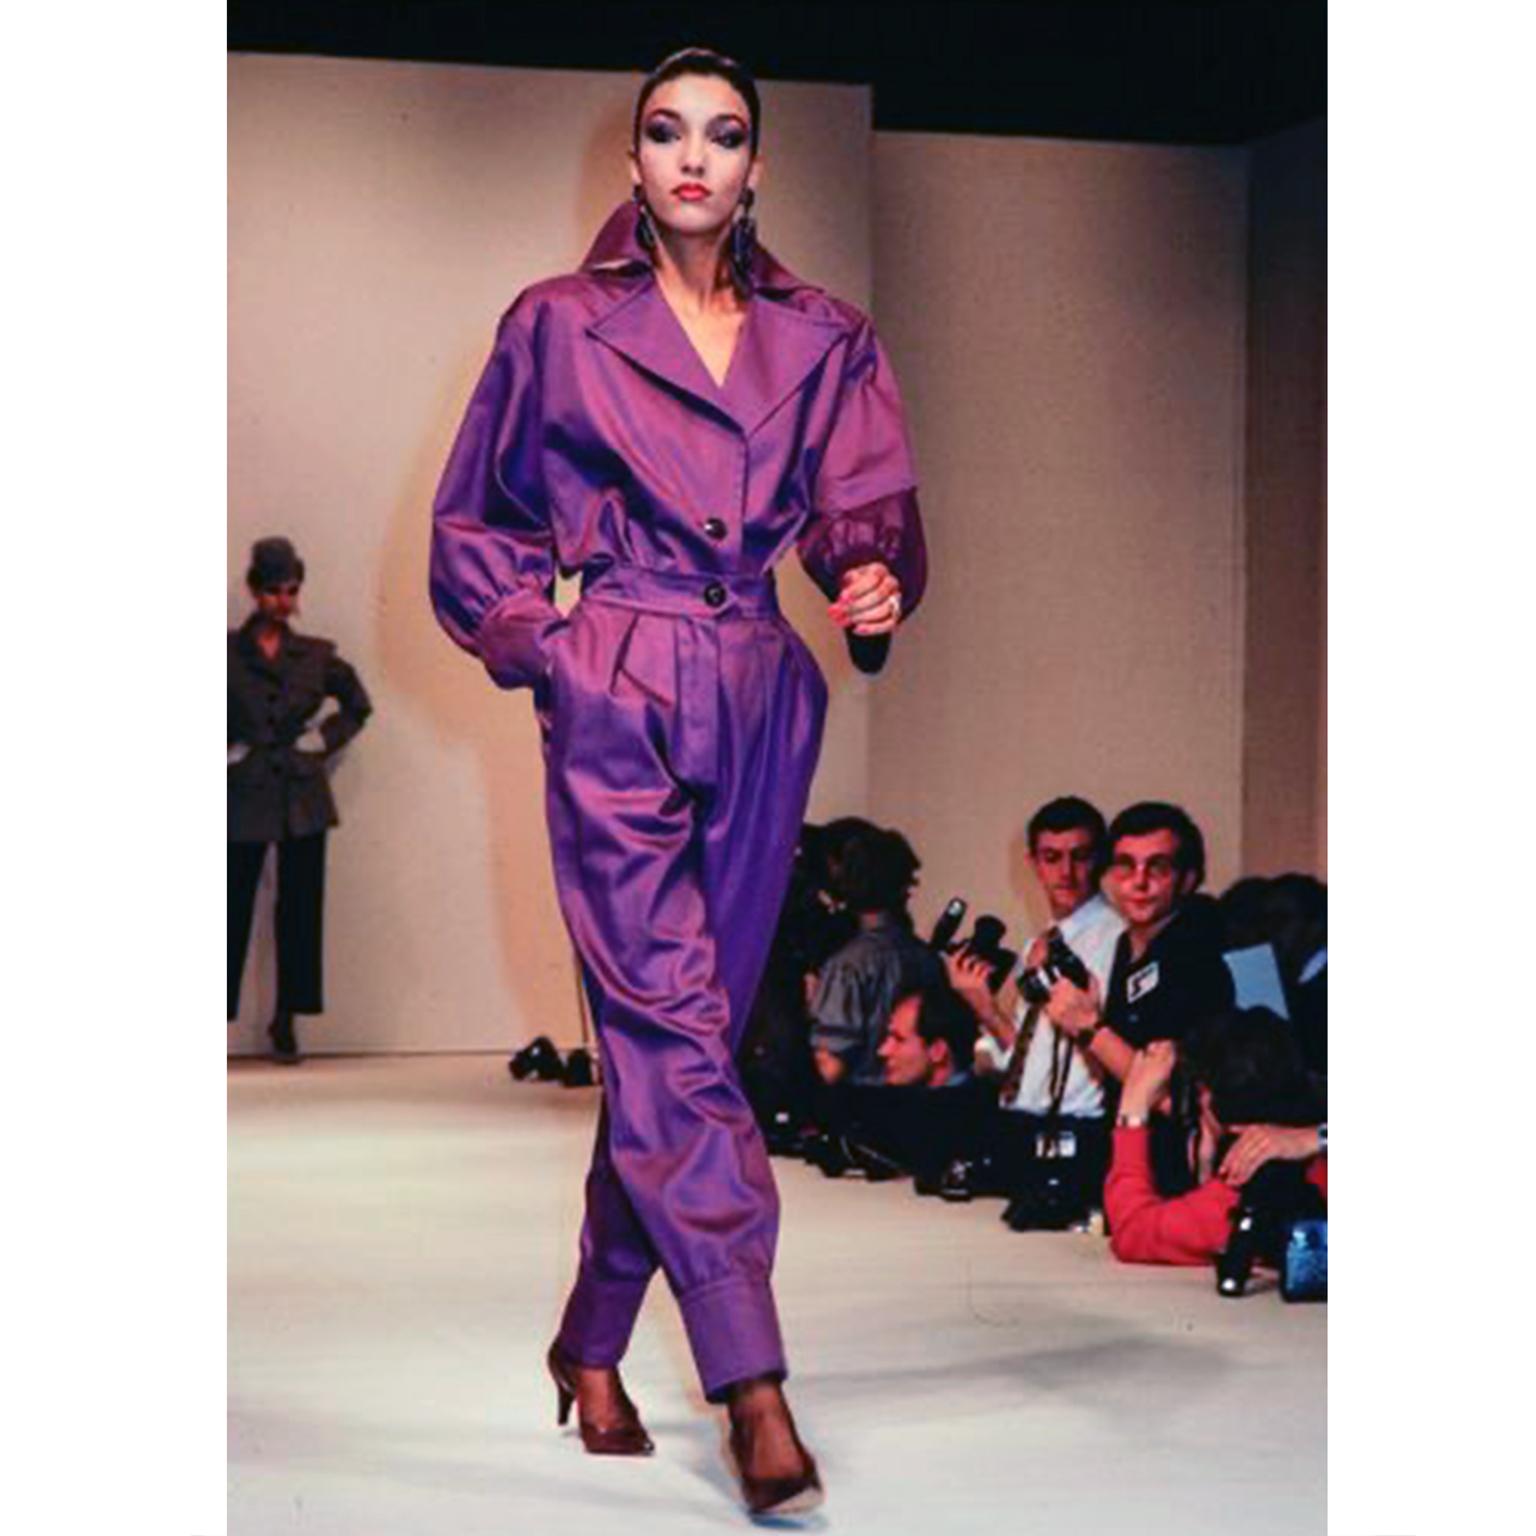 This is a fabulous Yves Saint Laurent runway documented 1985 2 piece outfit is made of sturdy purple cotton and it includes a jacket style shirt and a pair of high waisted trousers.

The jacket or top has long, puffy peasant sleeves, and a